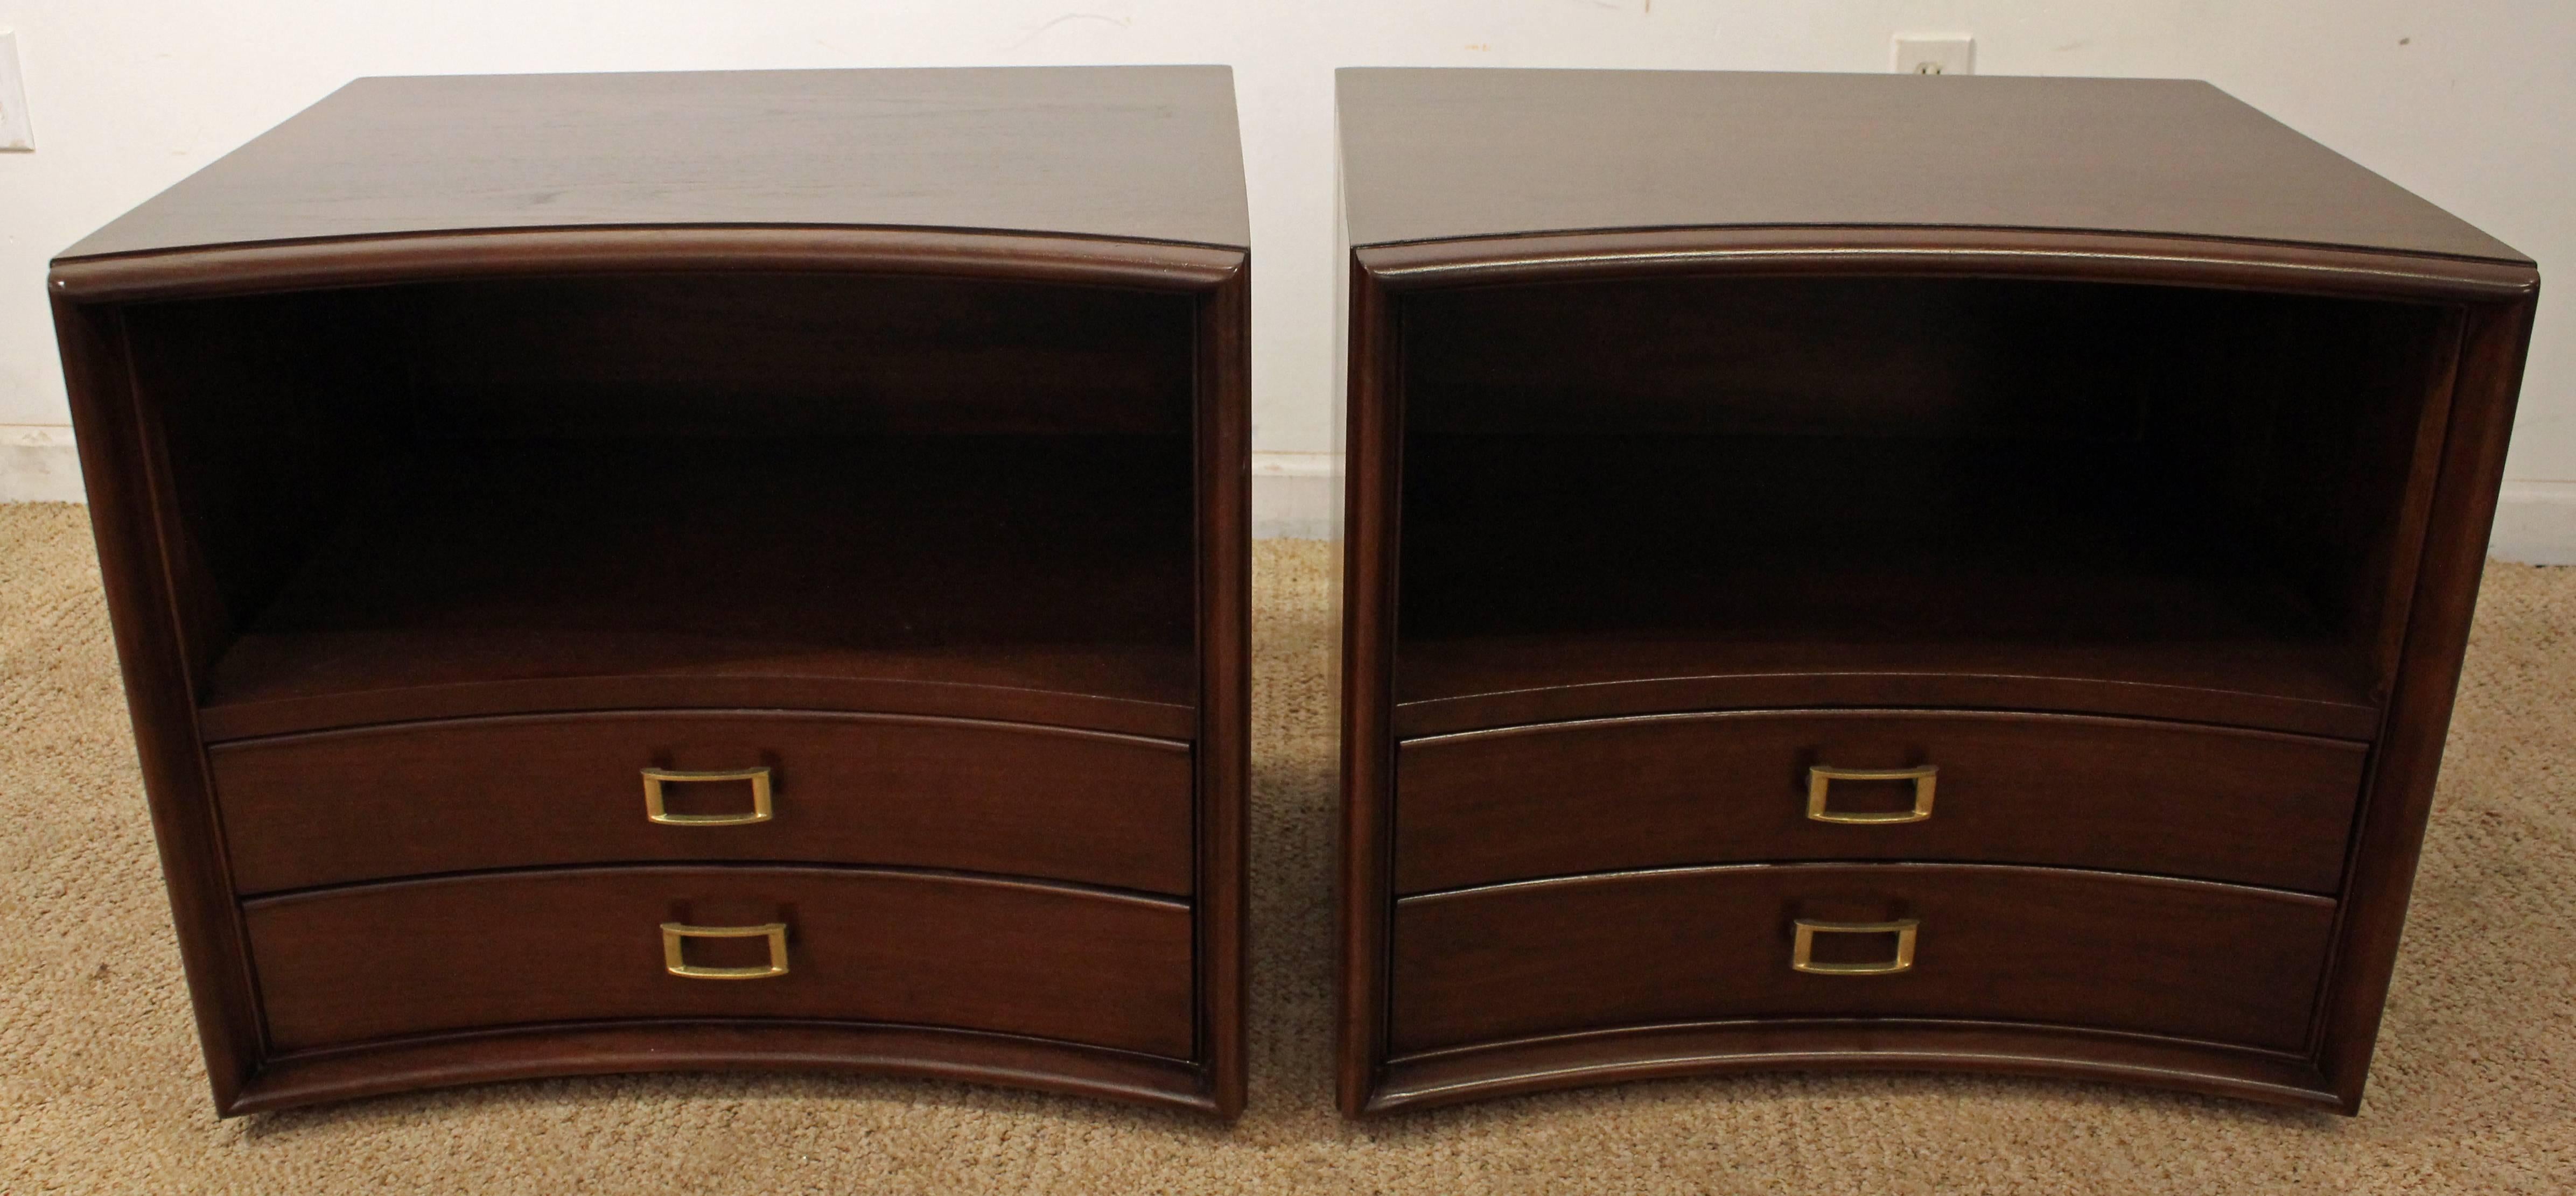 Made from satin birch, these nightstands were designed by Paul Frankl for Johnson Furniture's 